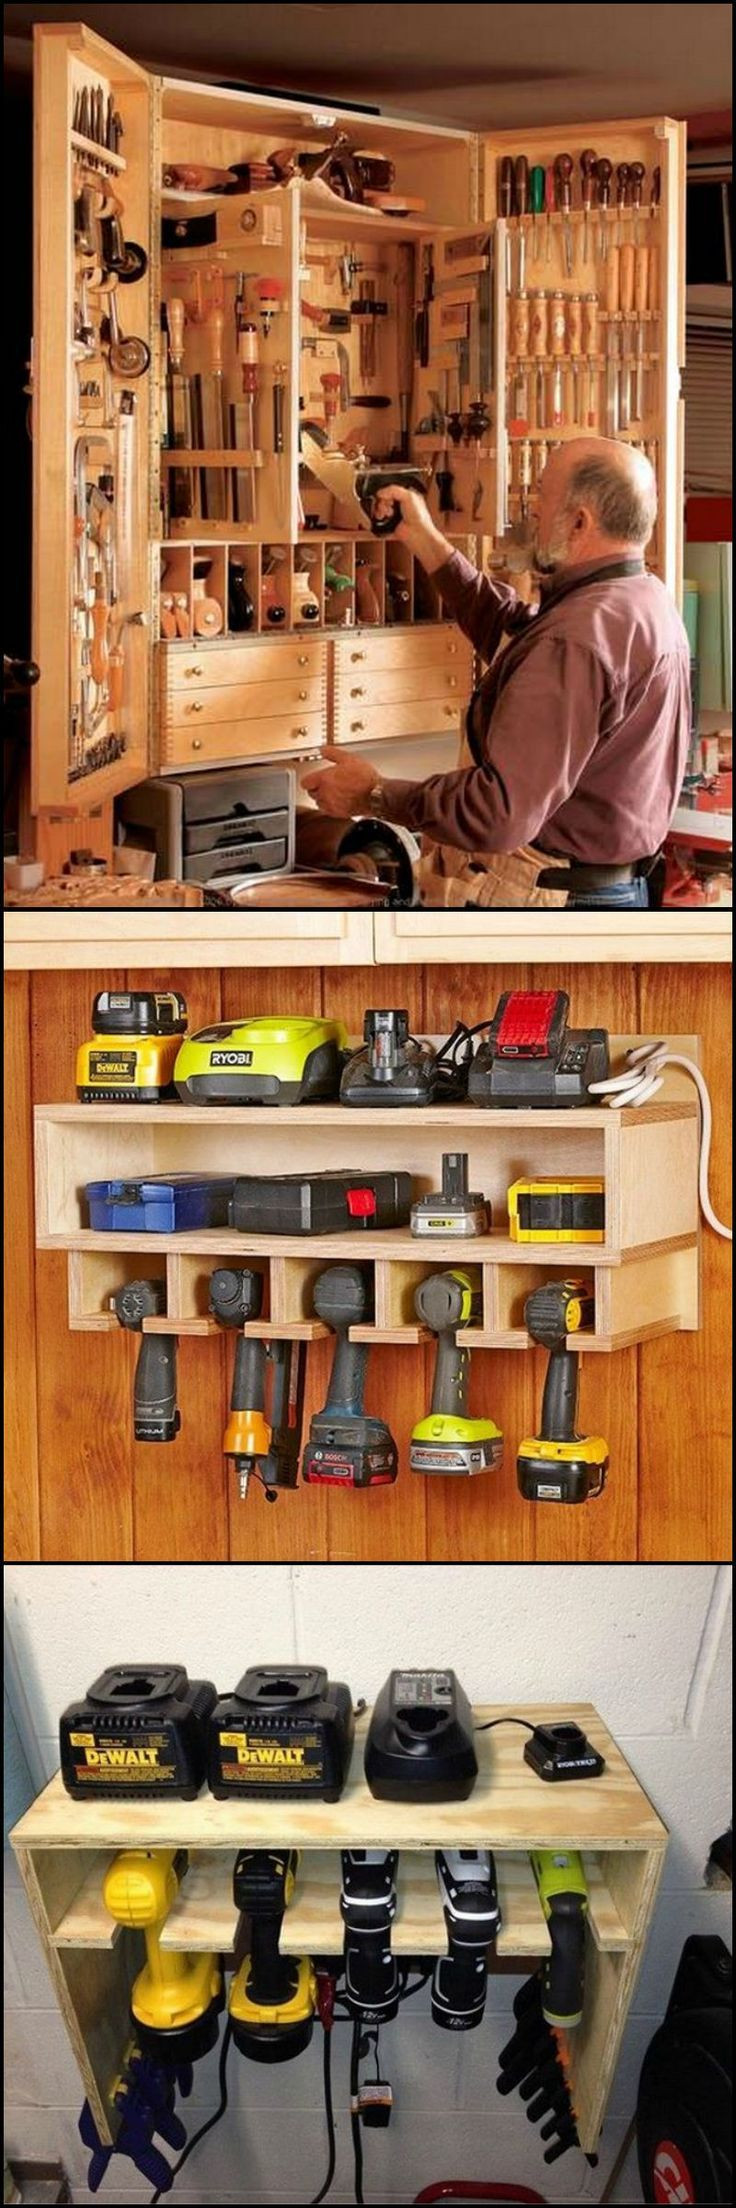 Organize Garage Workshop
 If you need clever ideas on how to organize and store the